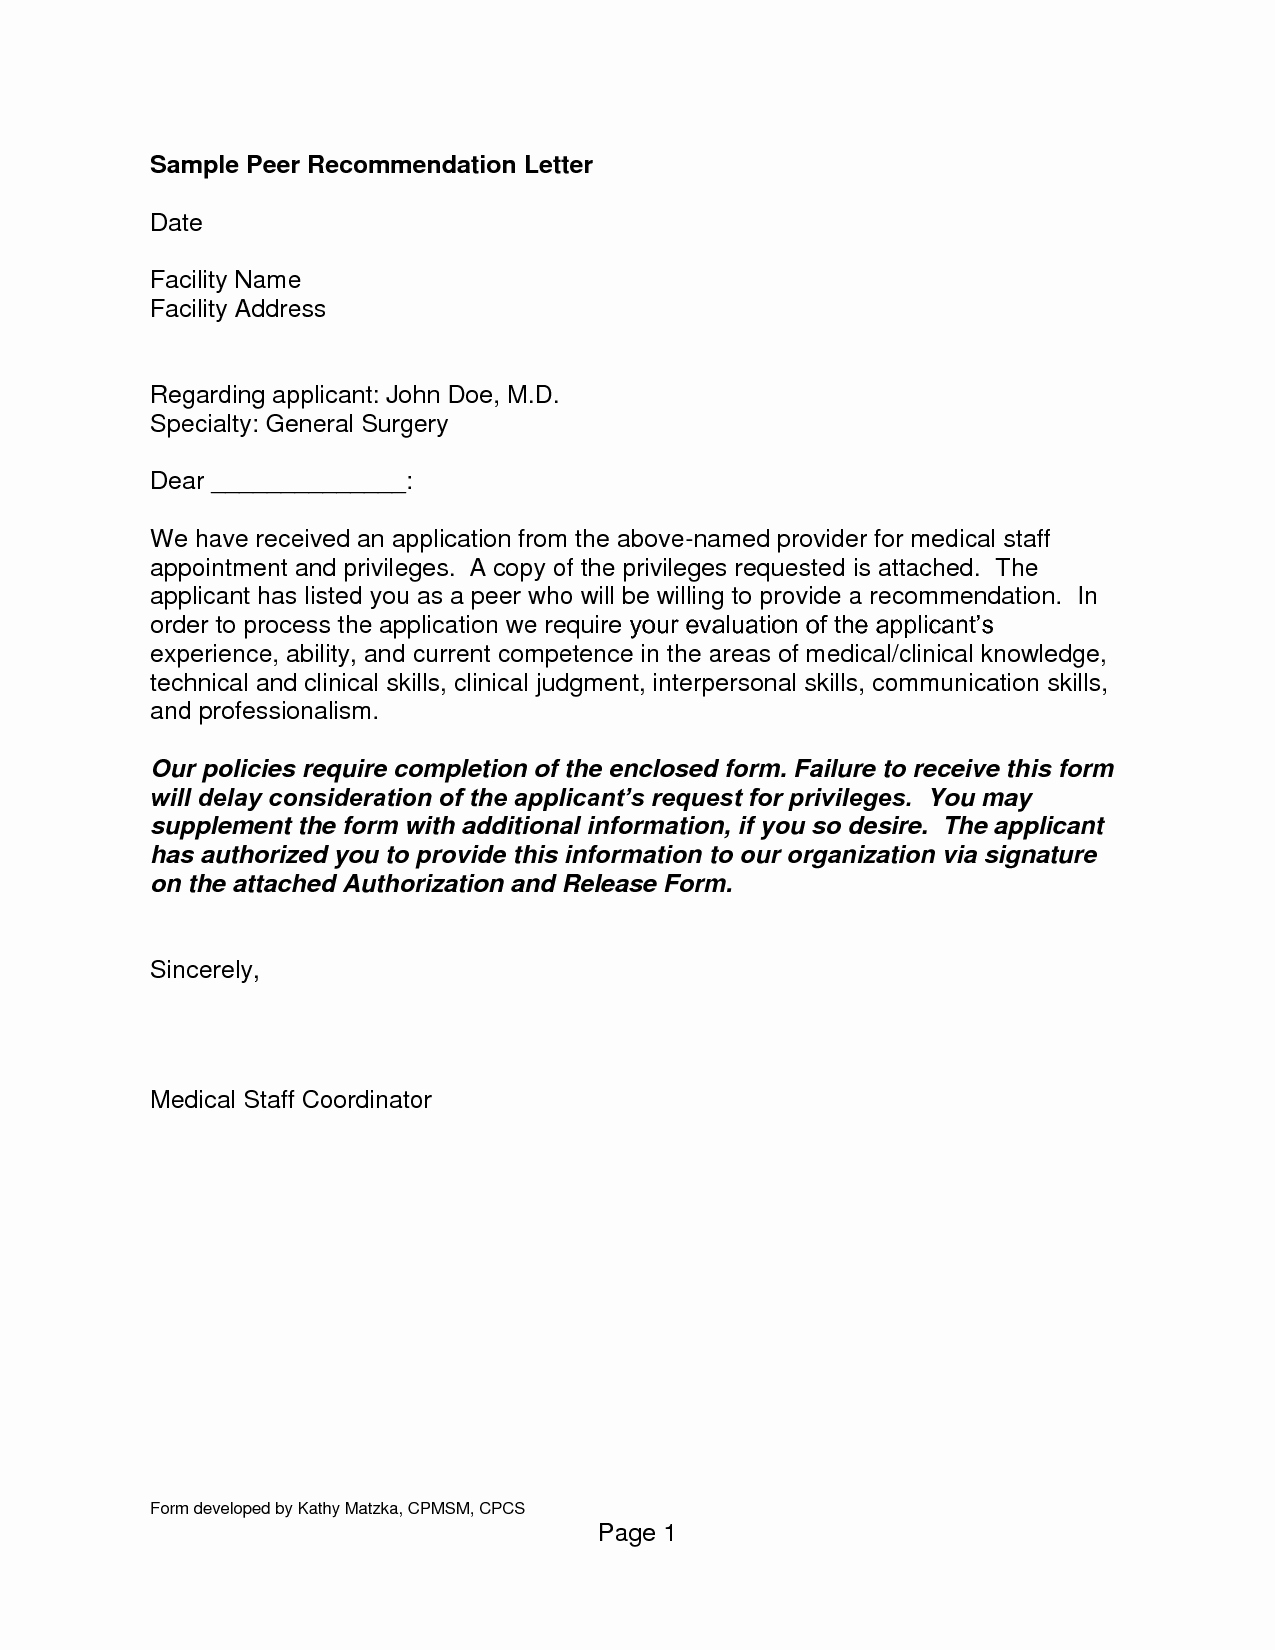 Reference Letter Template Letter Of Re Mendation format